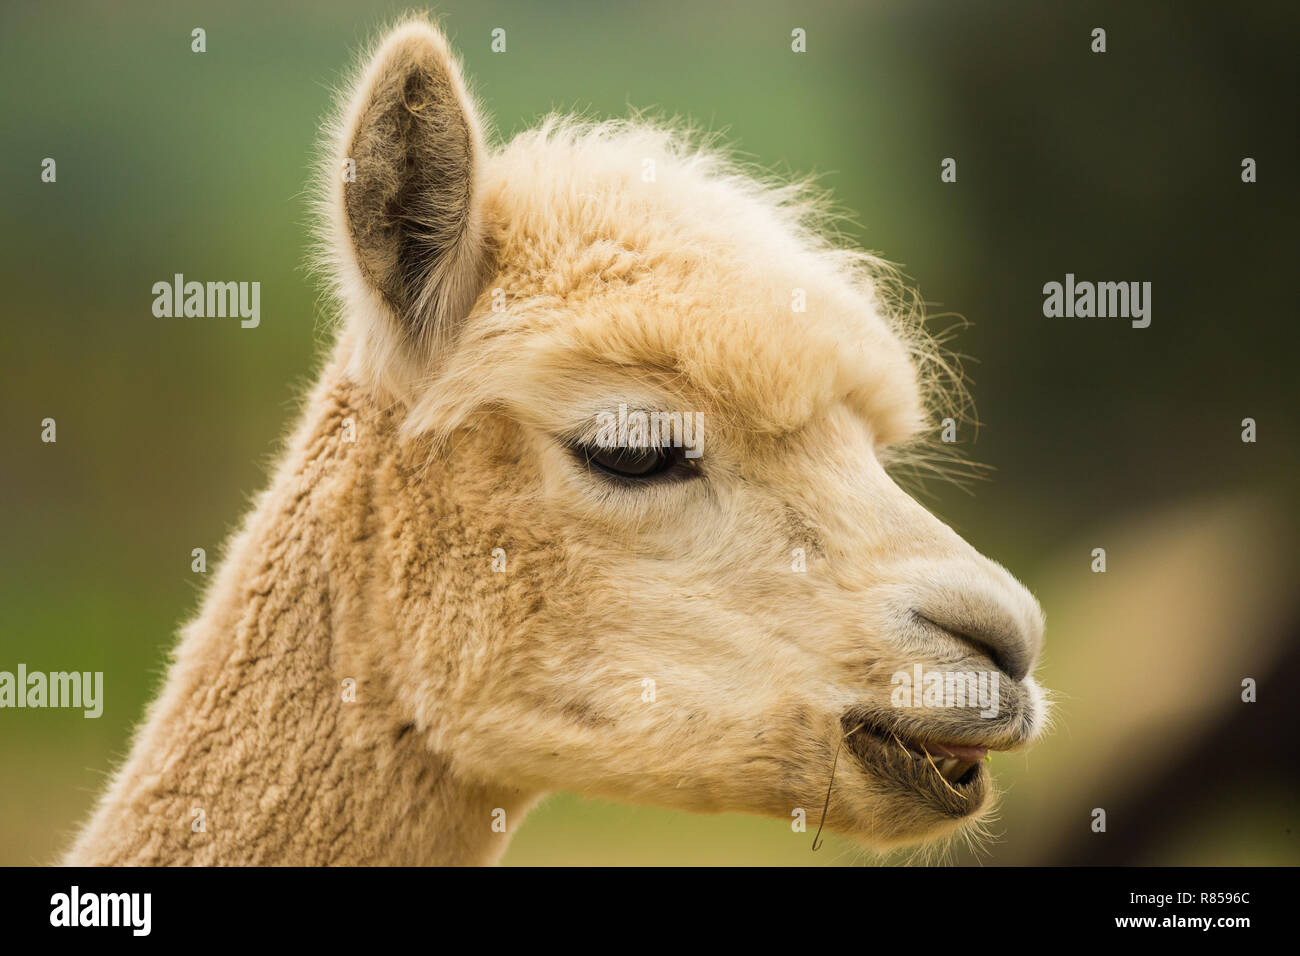 Alpaca animal with food in its mouth and its head up on a farm in Paarl, South Africa Stock Photo